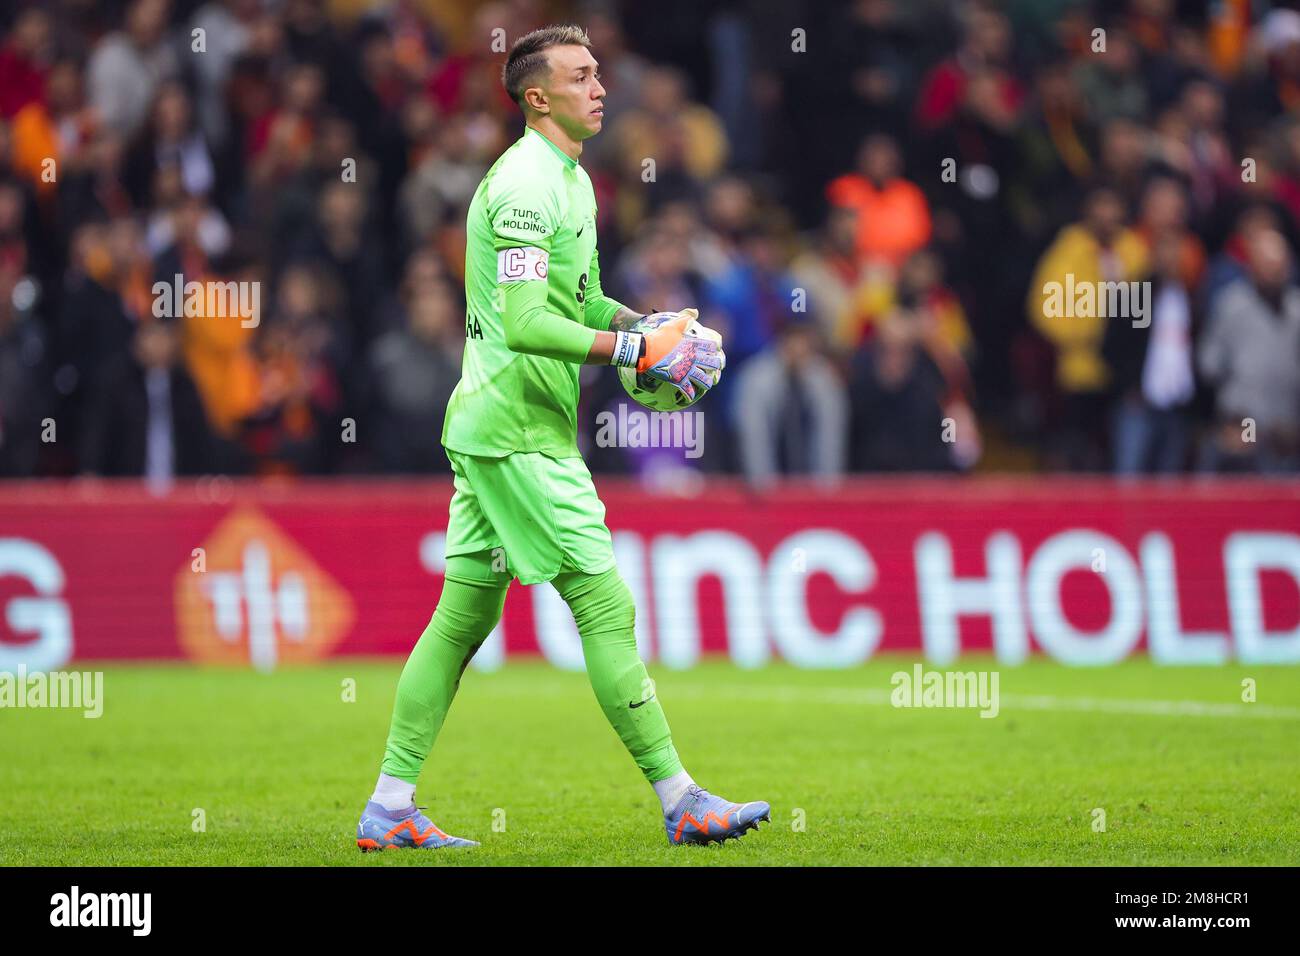 ISTANBUL, TURKEY - JANUARY 13: Fernando Muslera of Galatasaray during the Super Lig match between Galatasaray and Hatayspor at the NEF Stadium on January 13, 2023 in Istanbul, Turkey (Photo by Orange Pictures) Credit: Orange Pics BV/Alamy Live News Stock Photo